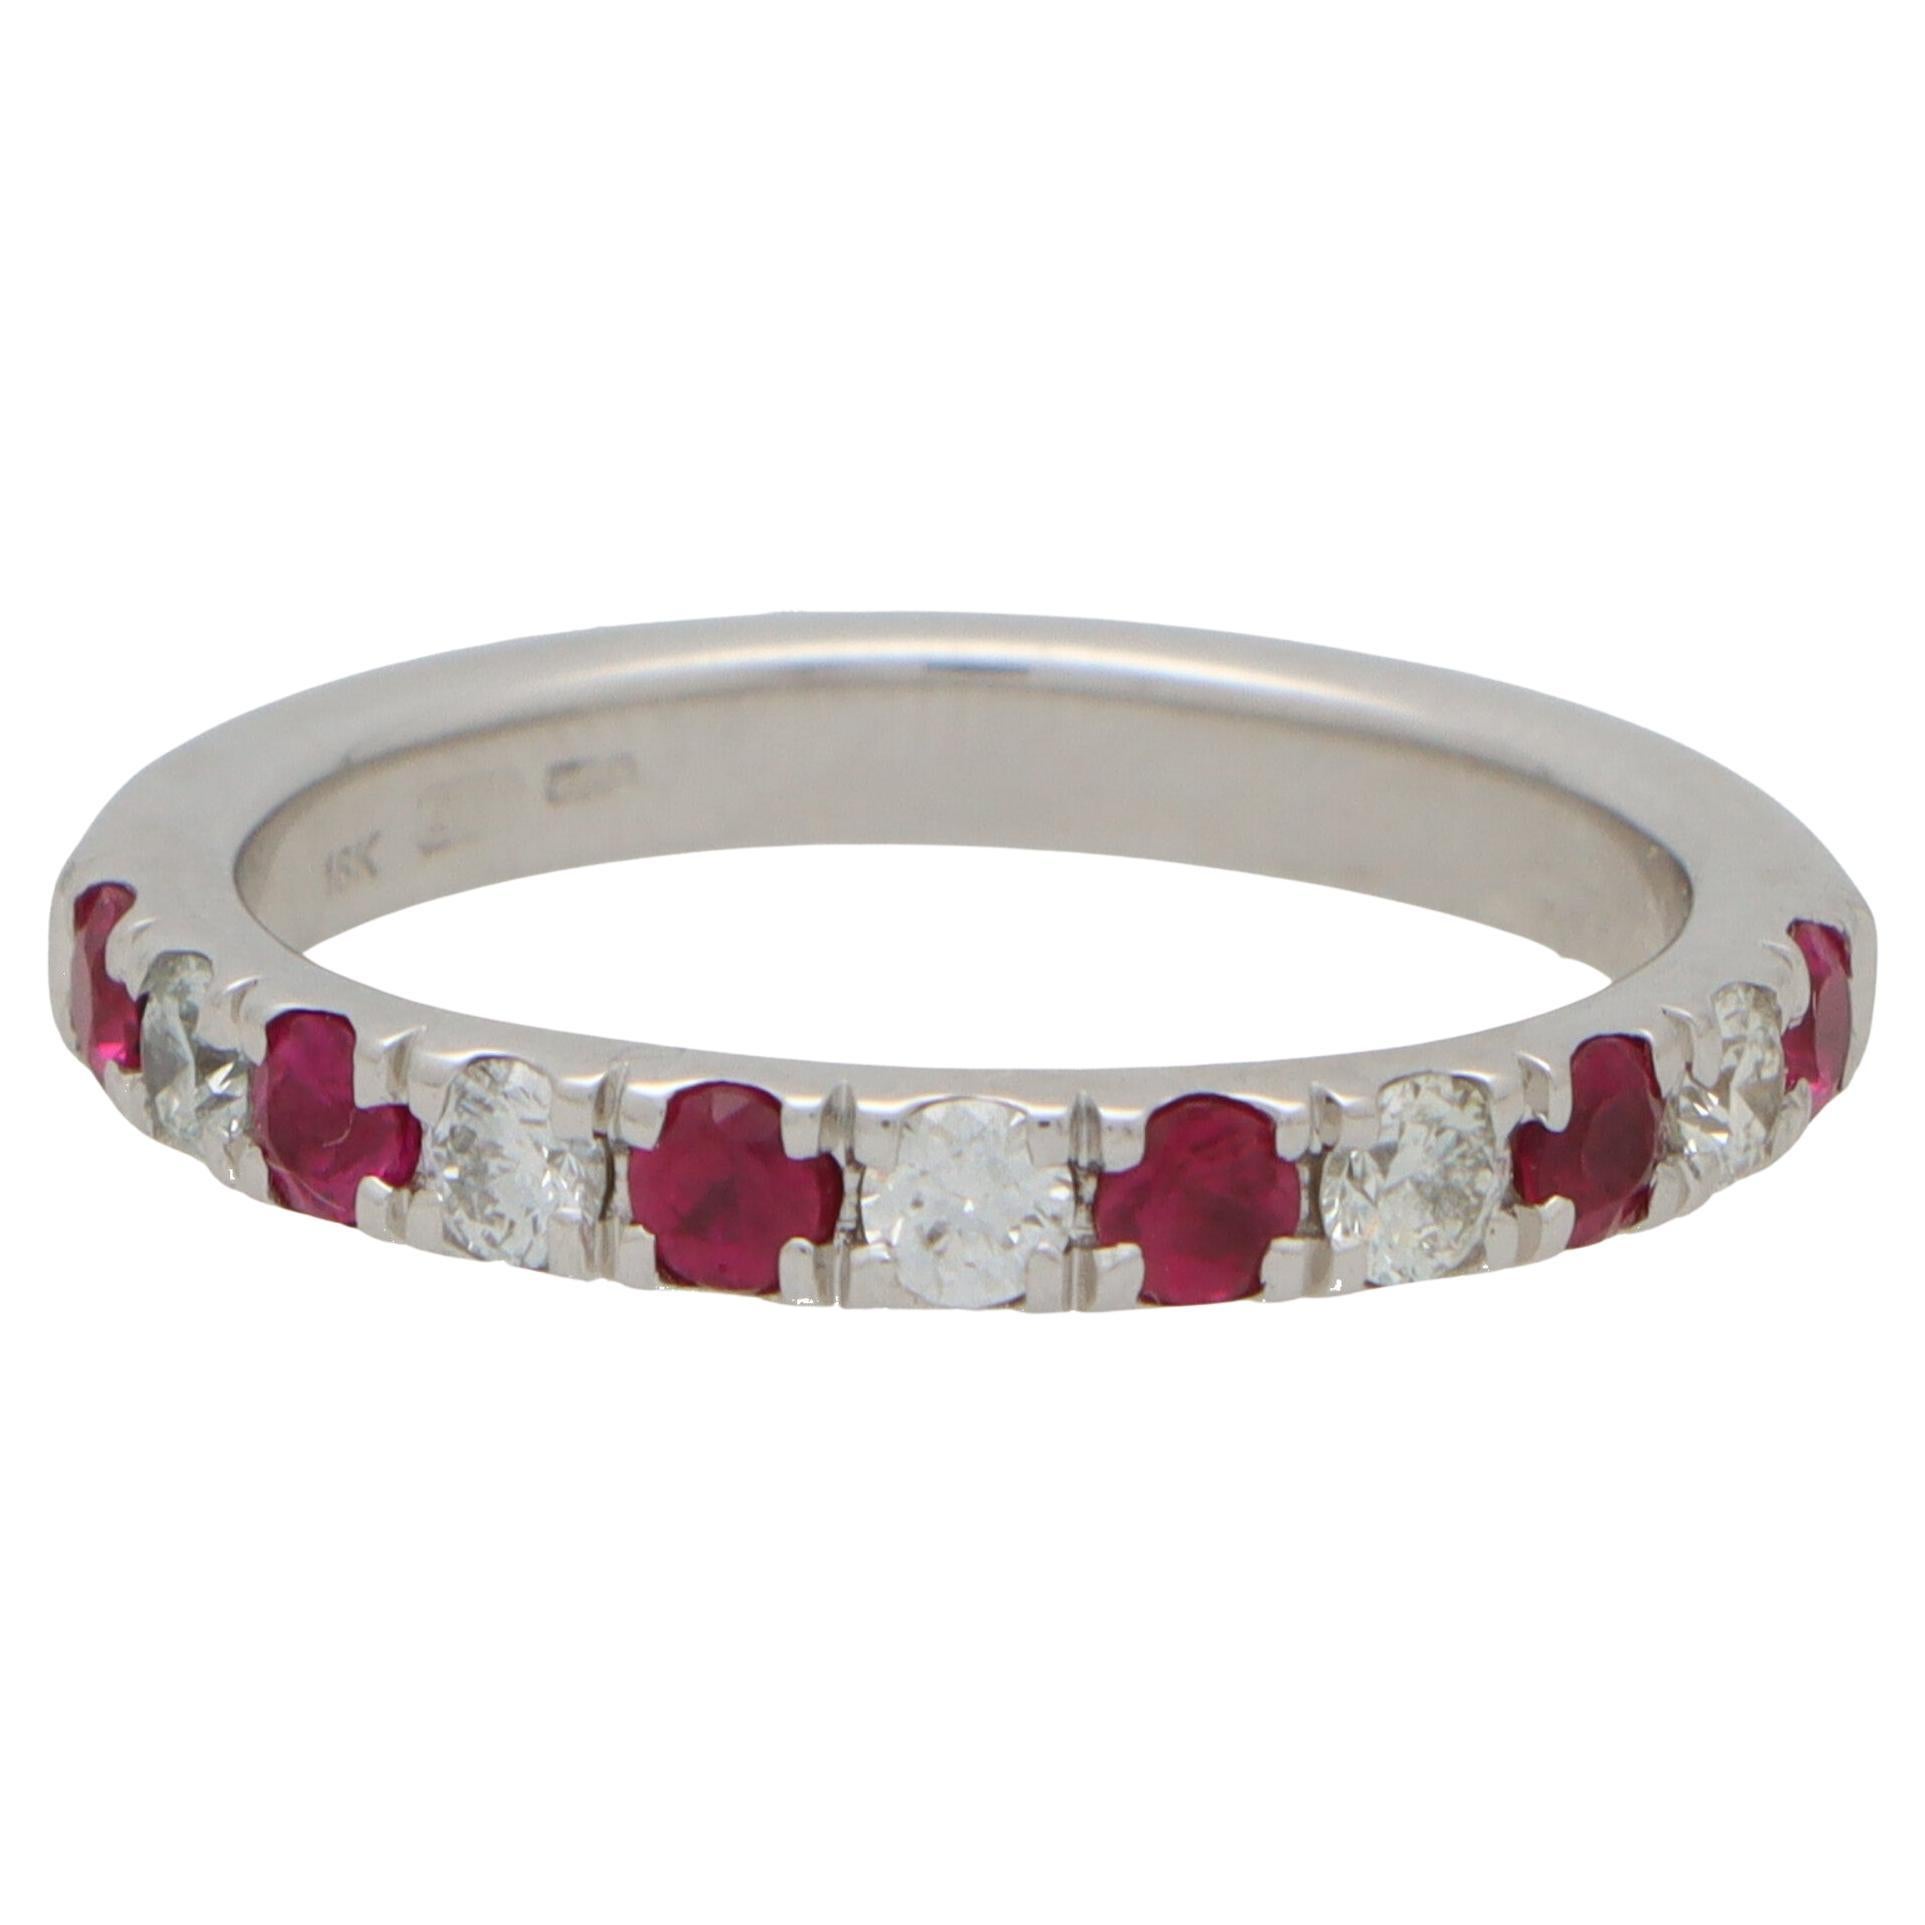 Contemporary Ruby and Diamond Half Eternity Band Ring in 18k White Gold